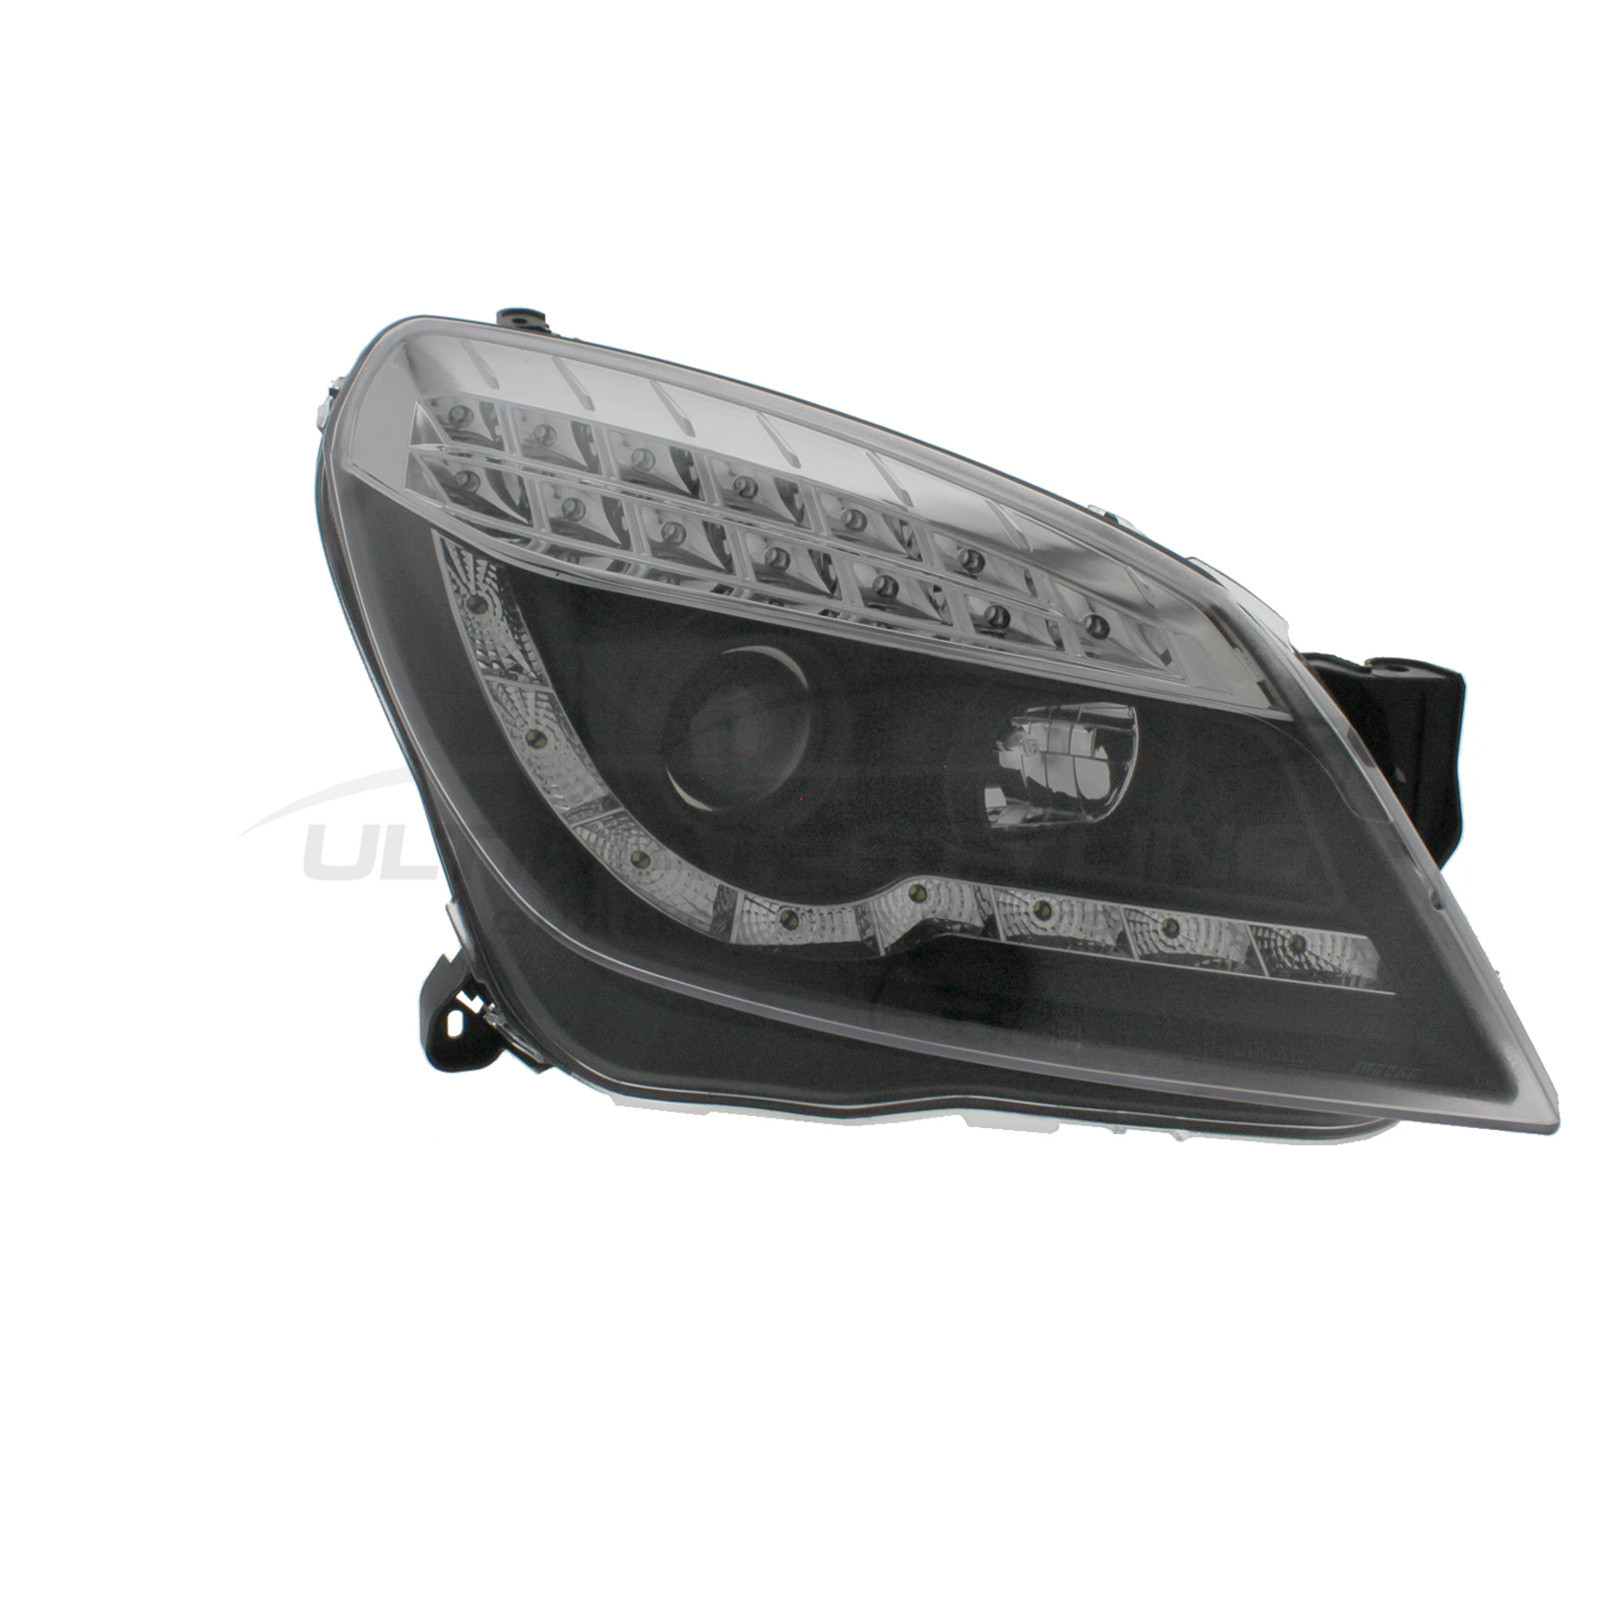 Vauxhall Astra H Mk5 2004-2011 Upgrade Headlights Black Inner LED DRL with LED Indicators Projector Xenon Look